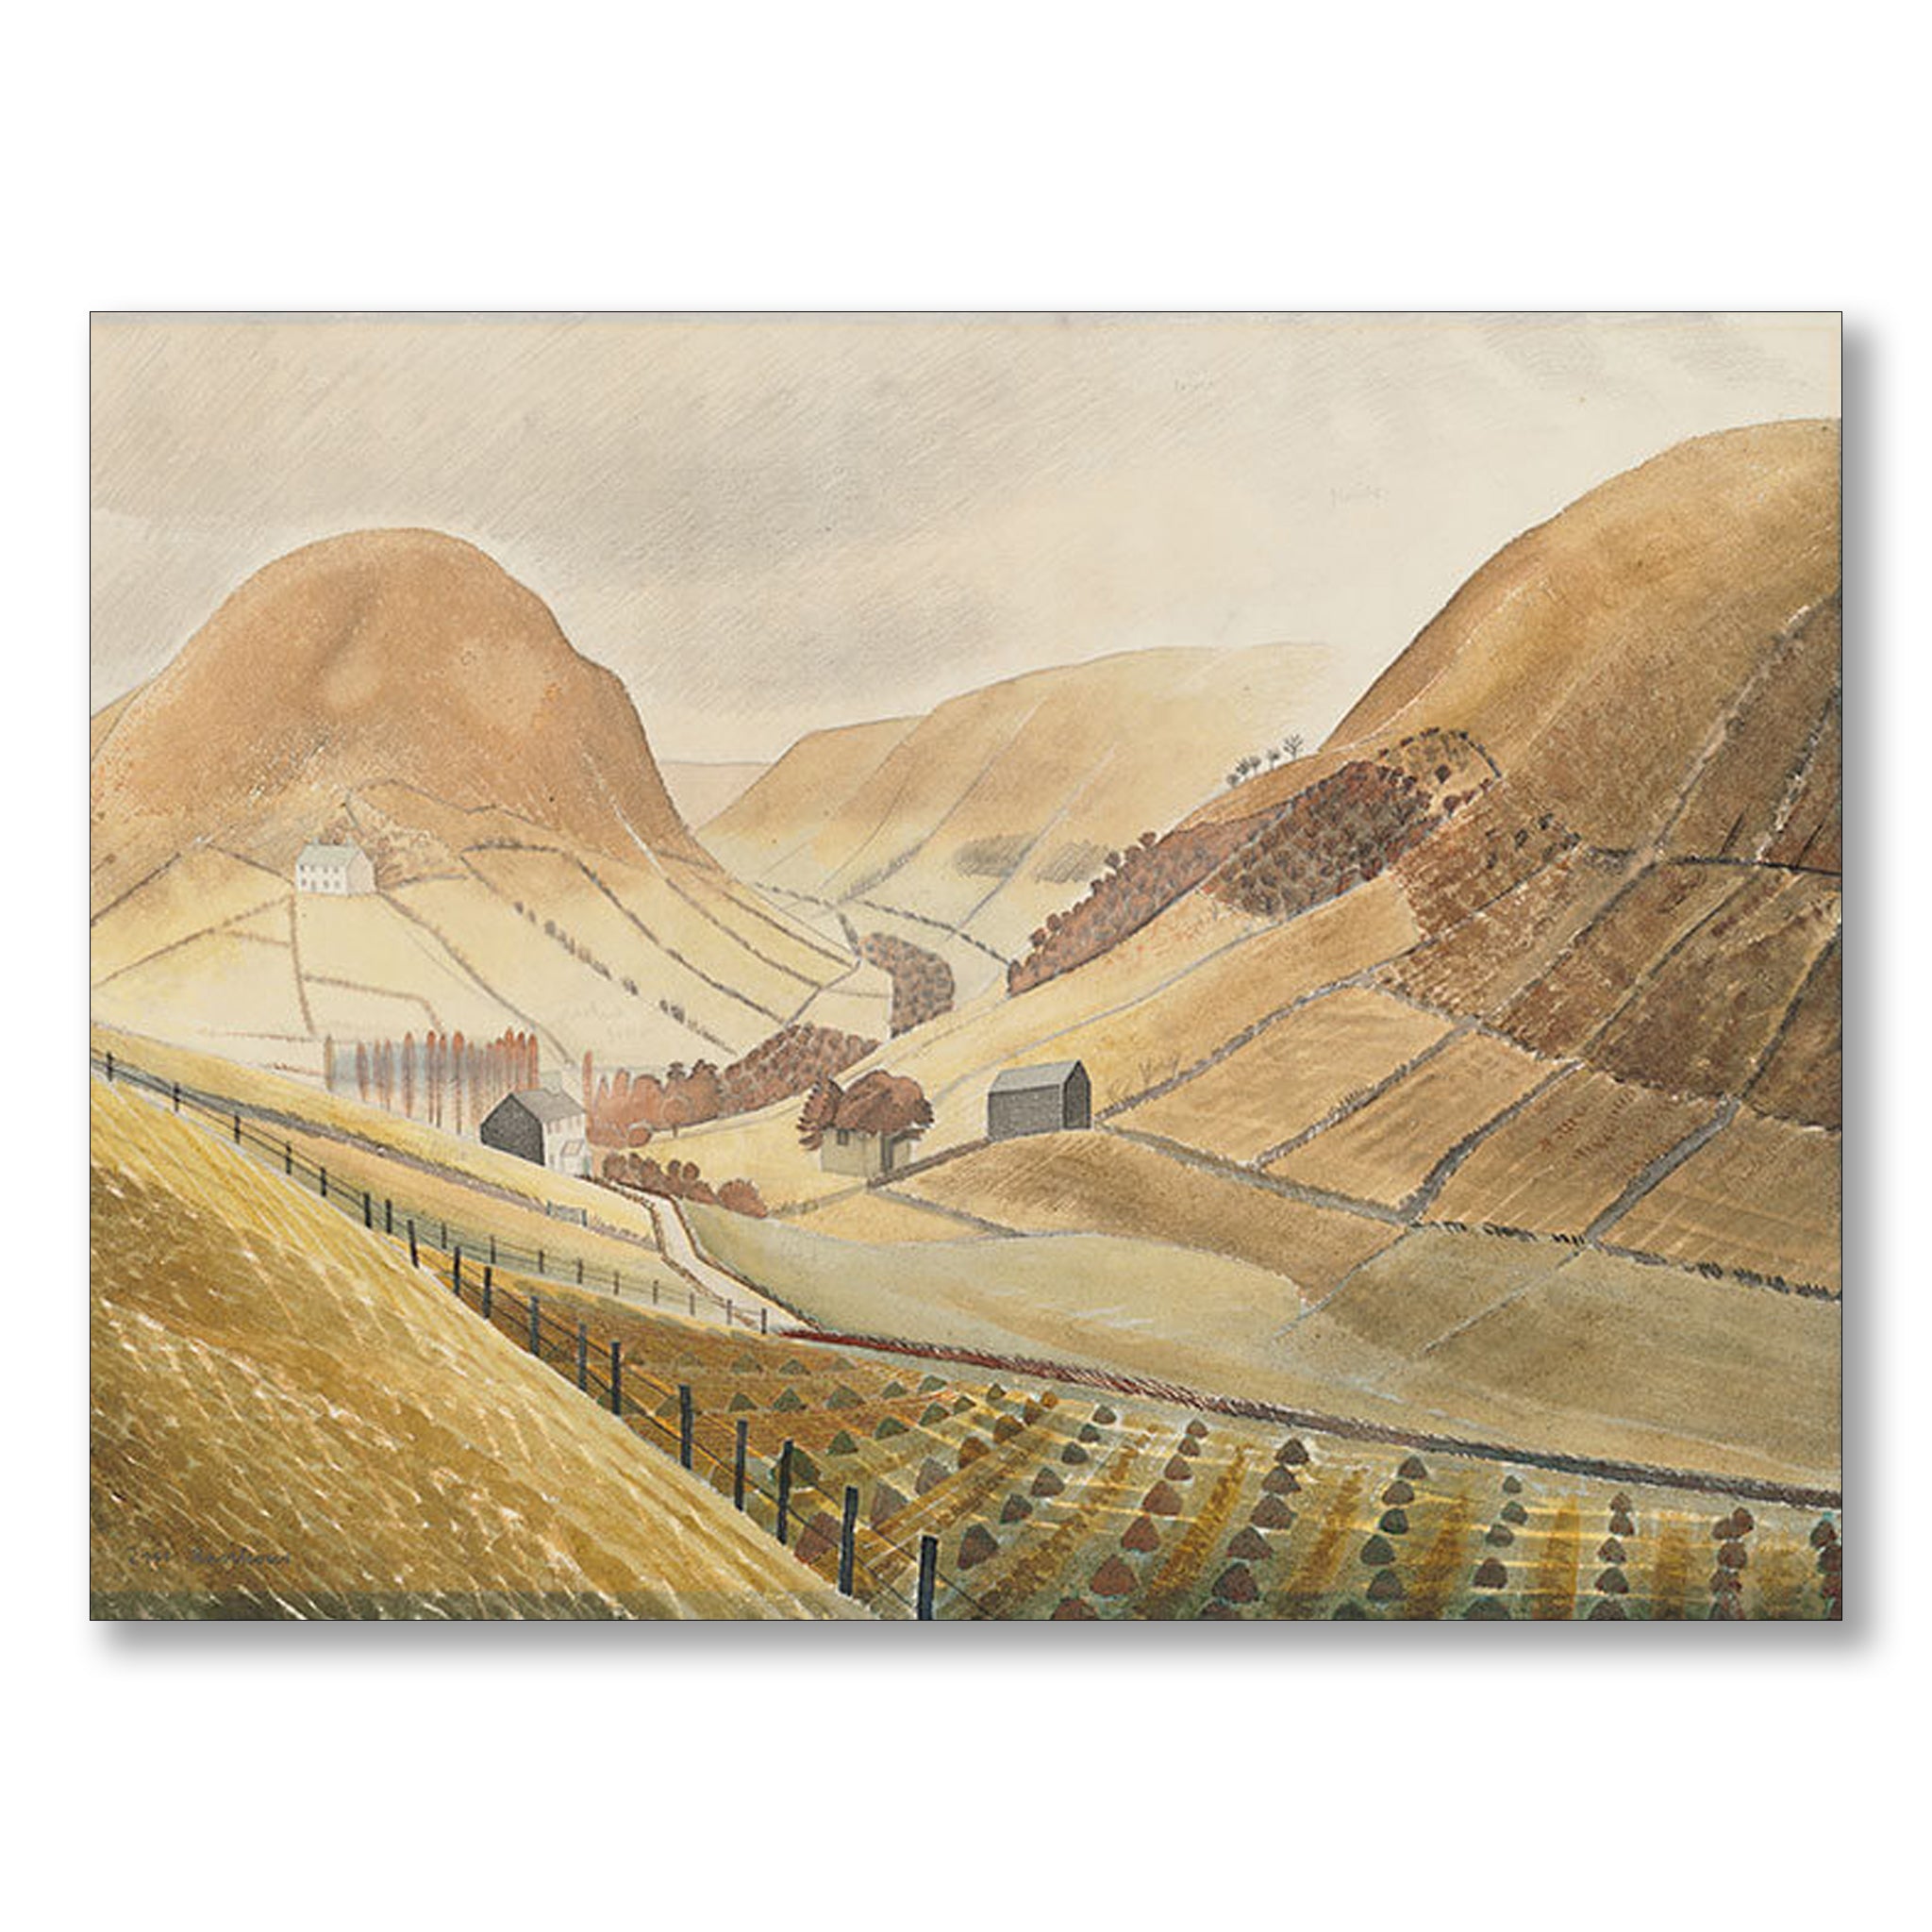 Corn Stooks and Farmsteads - Wales, 1938 by Eric Ravilious